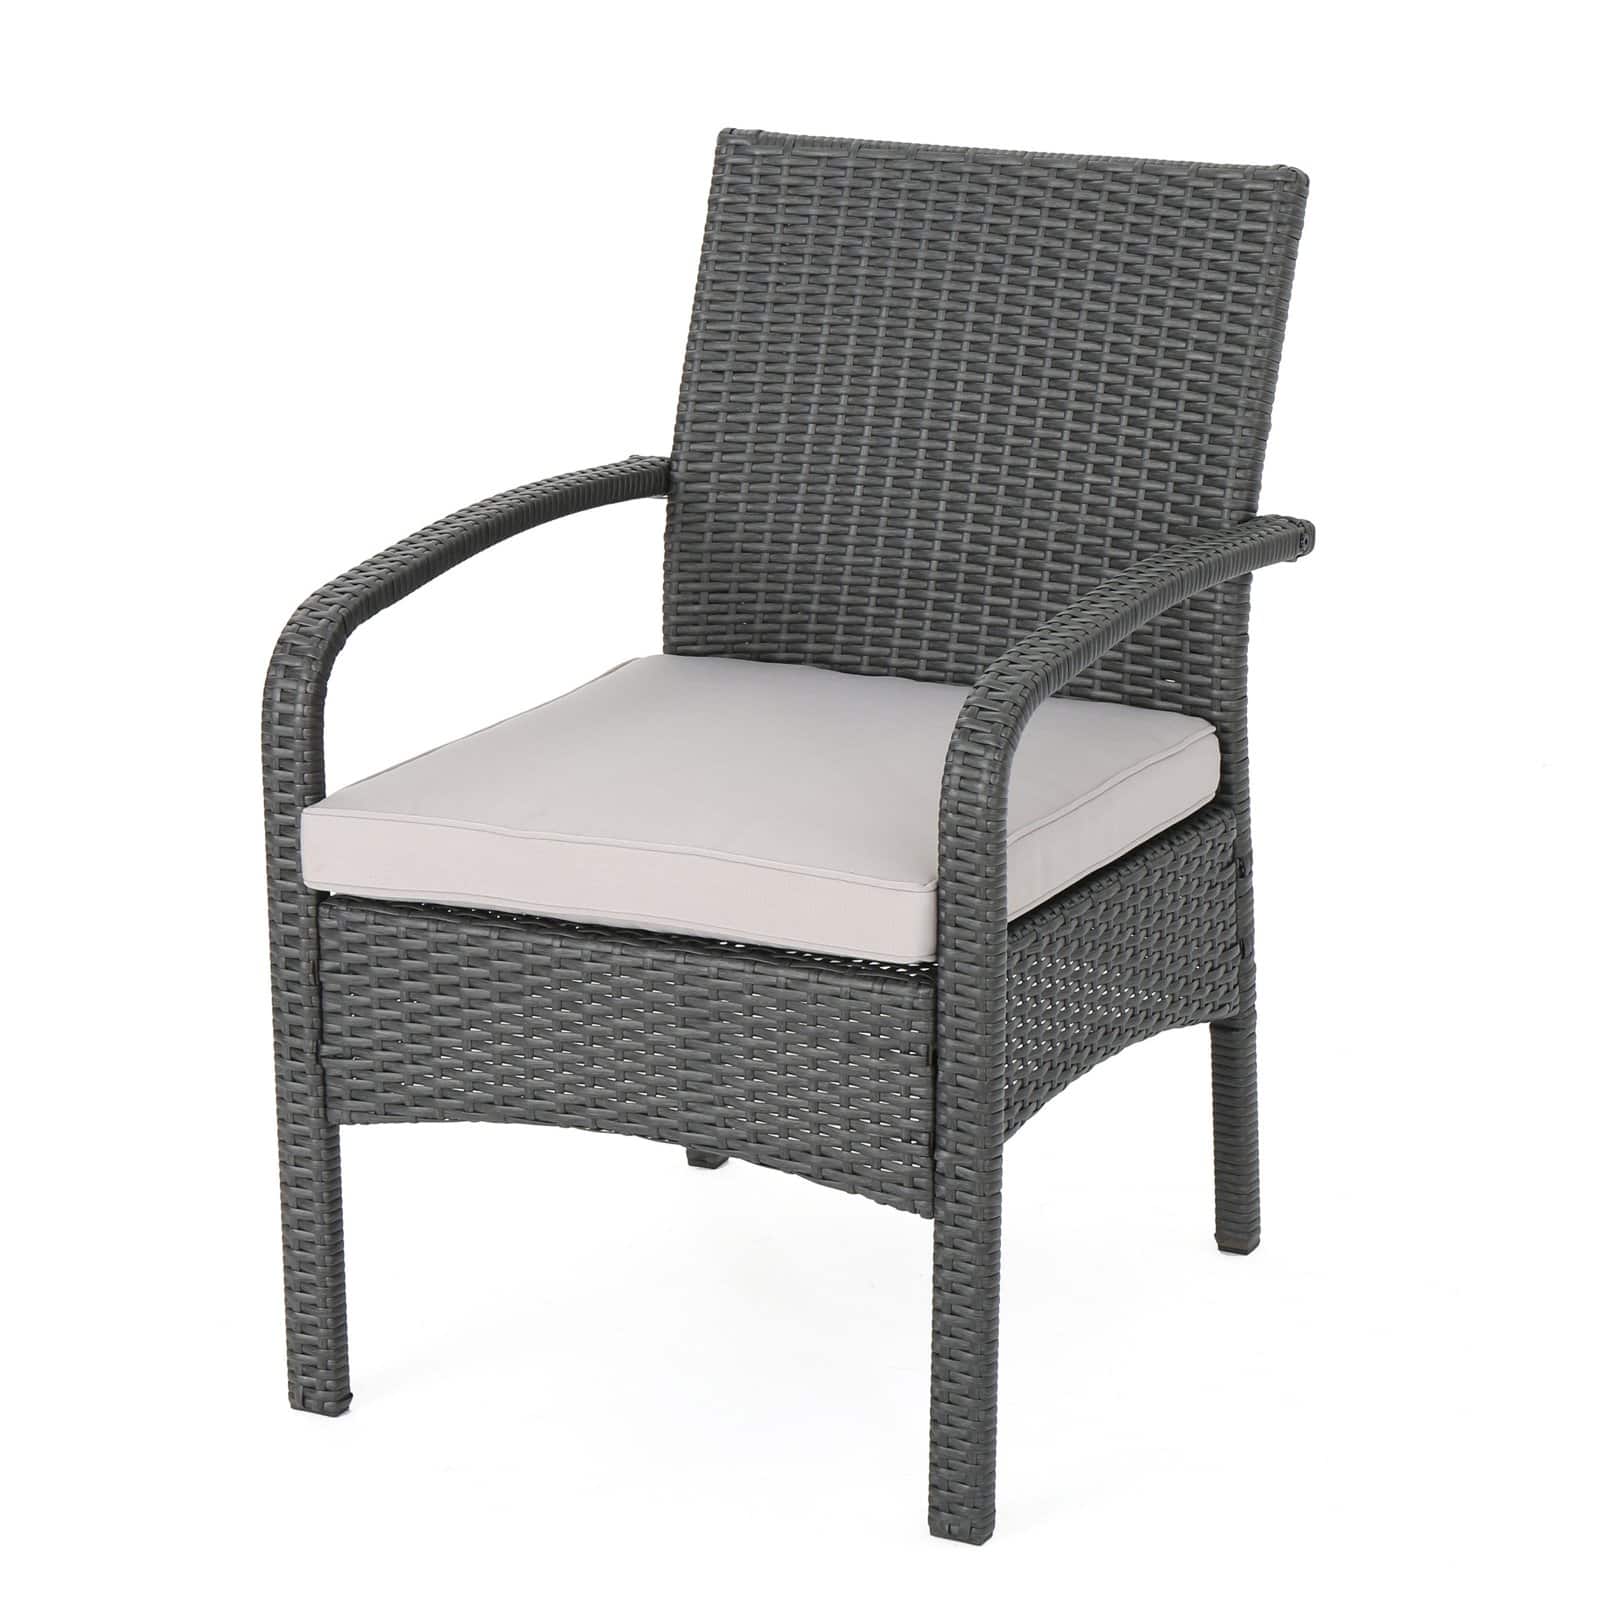 Christopher Knight Home Cordoba Outdoor Wicker 4-piece Conversation Set with Cushions by  Gray + Light Gray - image 5 of 11